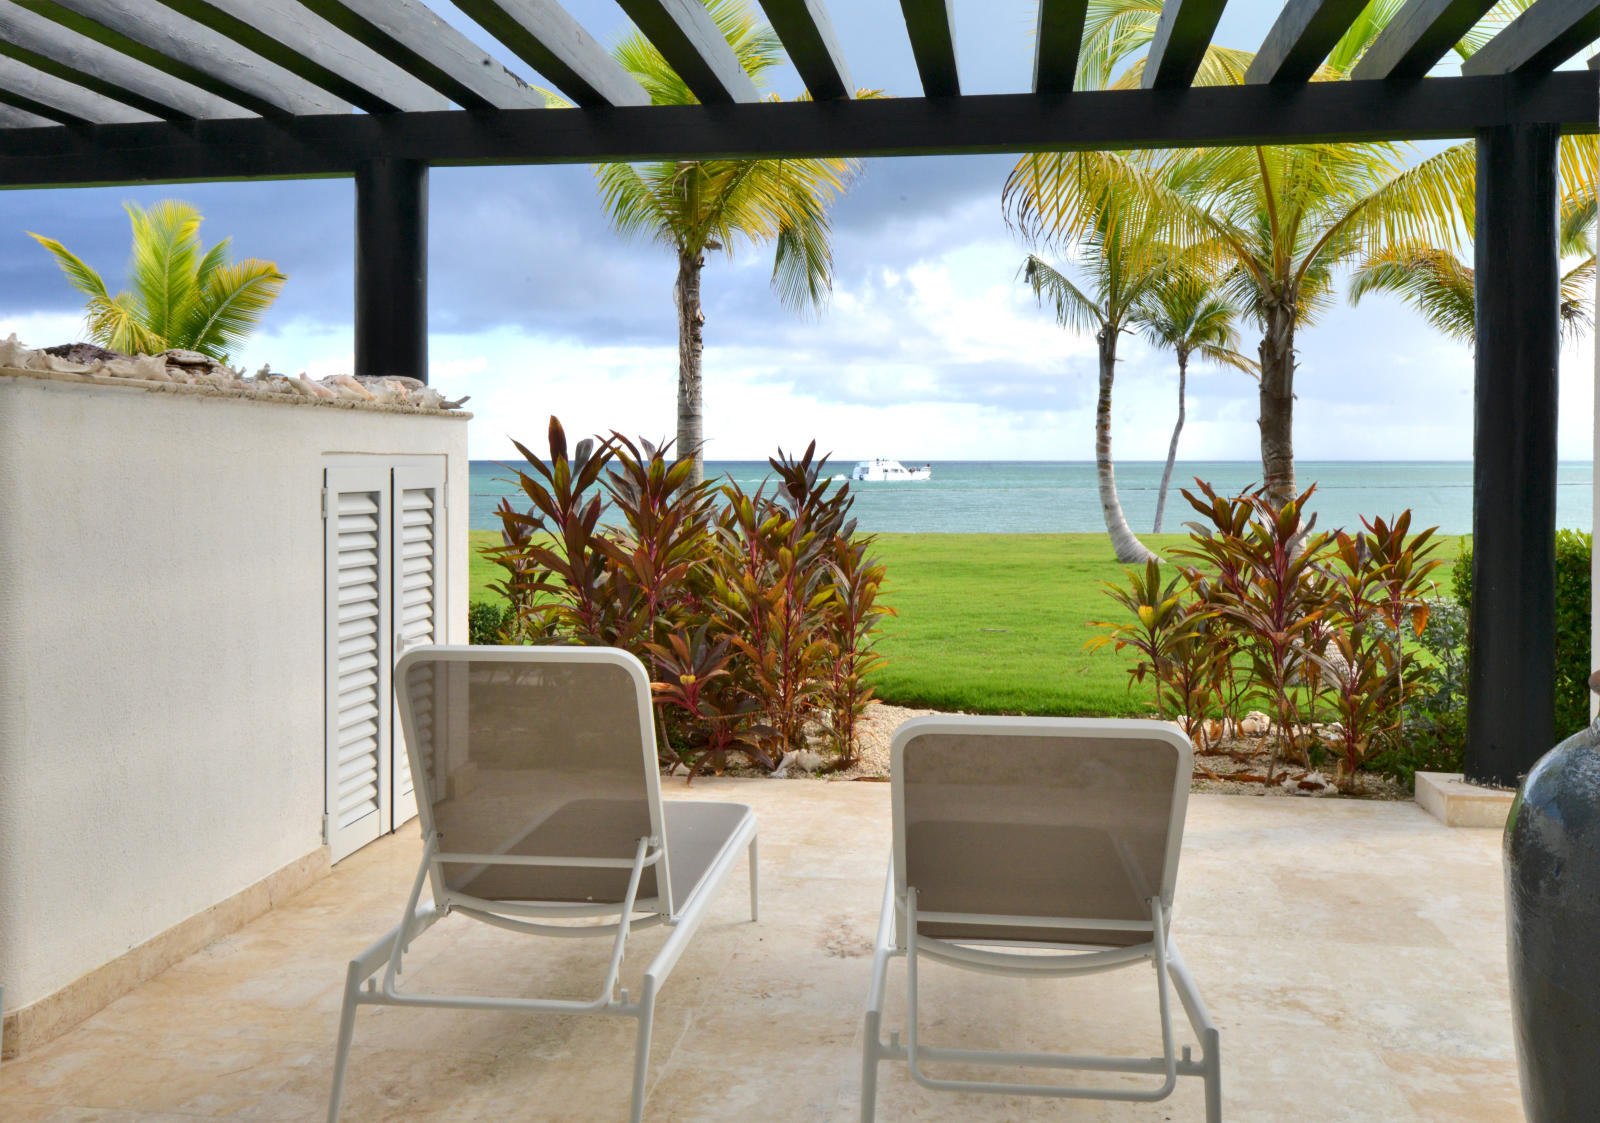 Luxury at Its Finest: Fabulous 2-Bedroom Beach Fro, Cap Cana, DO, 2 Bedrooms Bedrooms, ,2 BathroomsBathrooms,Residential,For Sale,Luxury at Its Finest: Fabulous 2-Bedroom Beach Fro,1394637